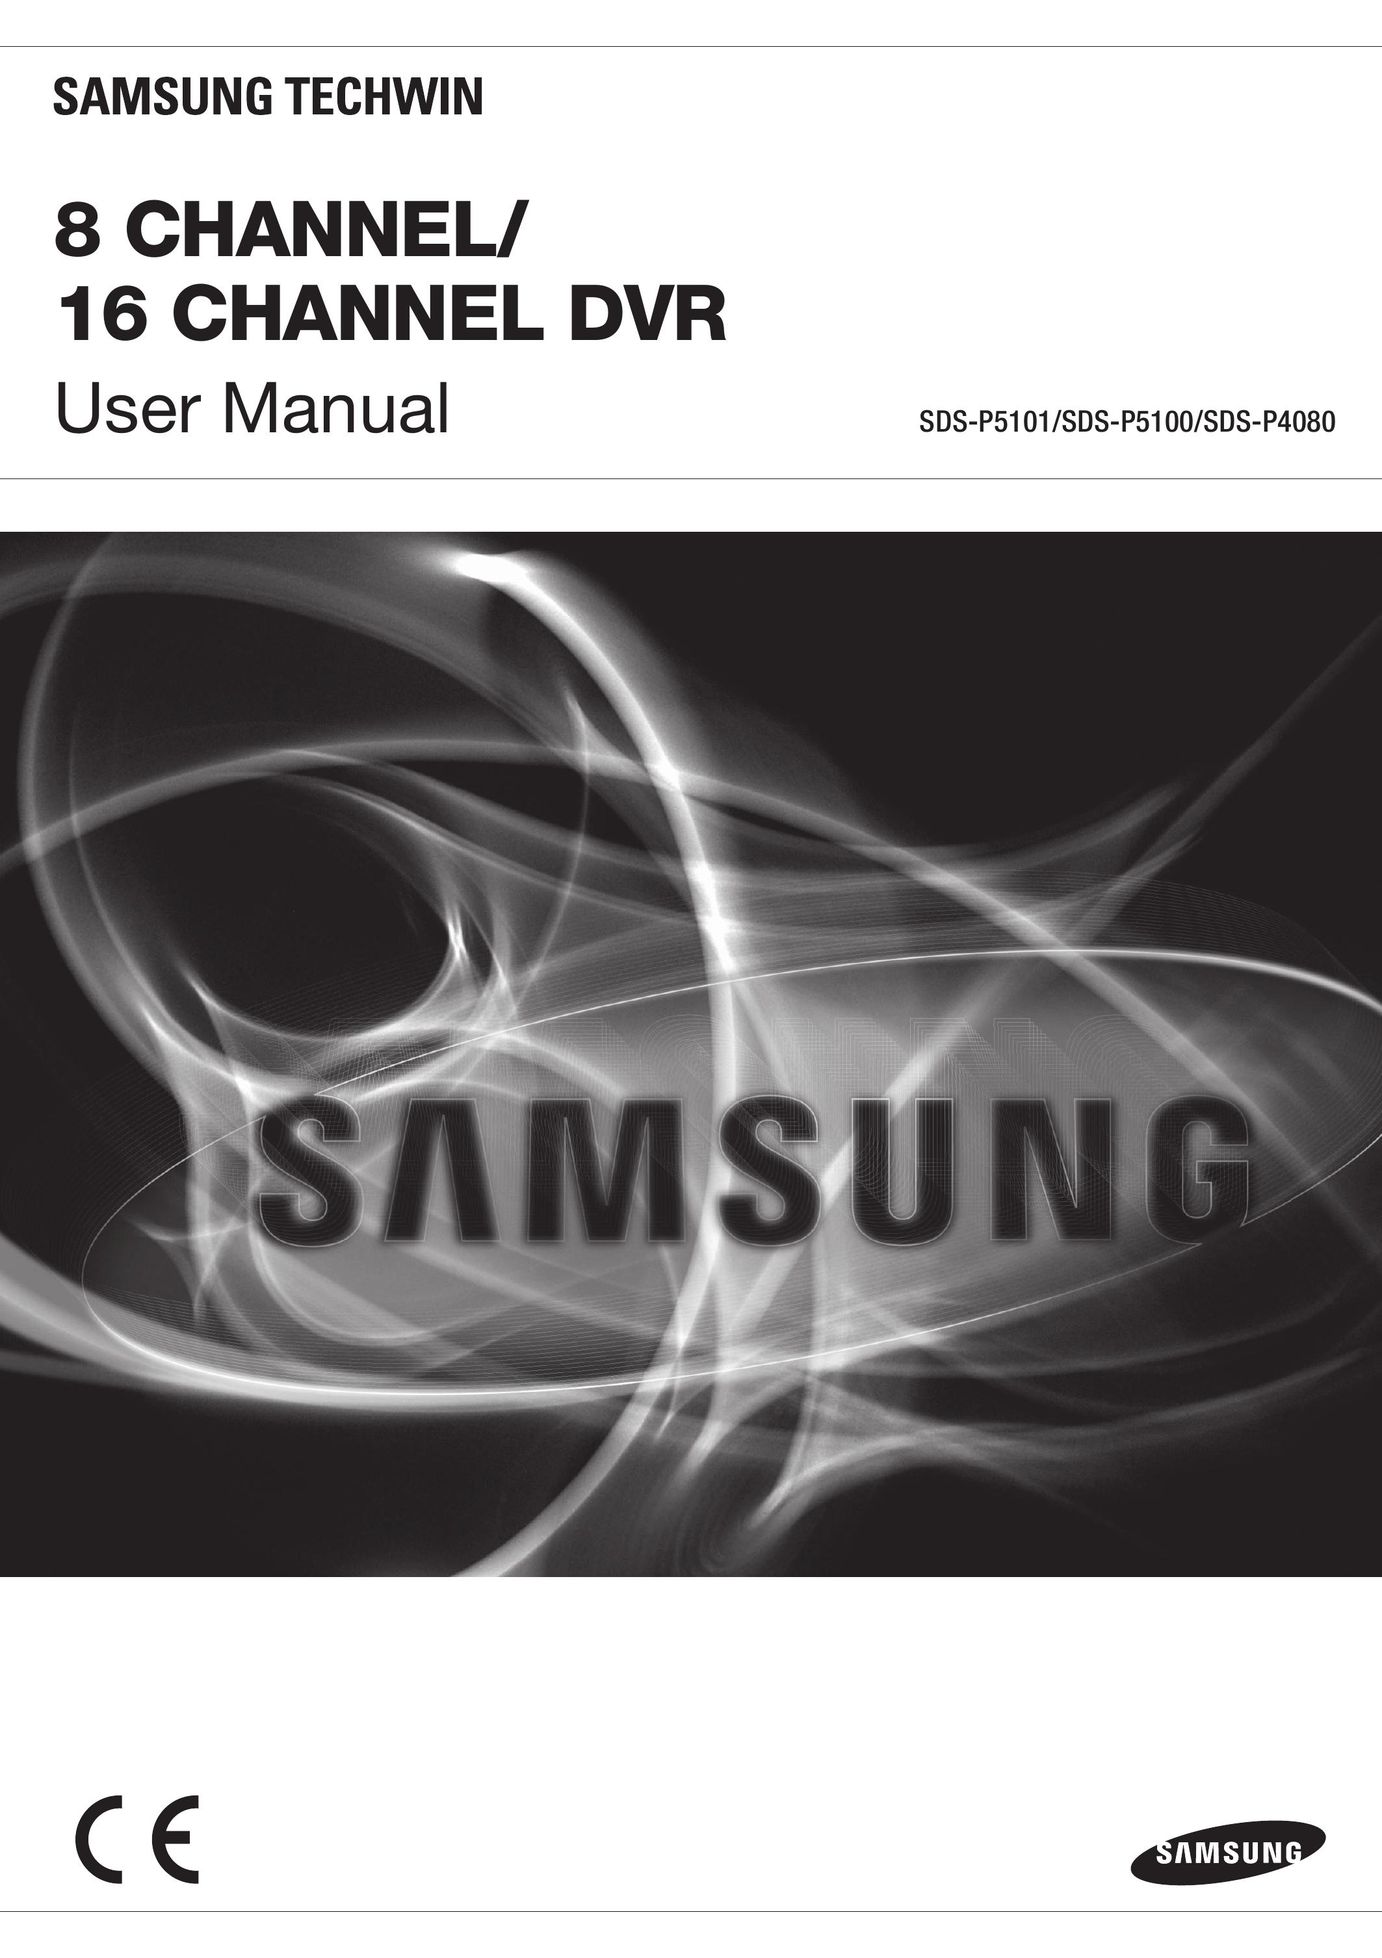 Samsung SDR4100 TV Video Accessories User Manual